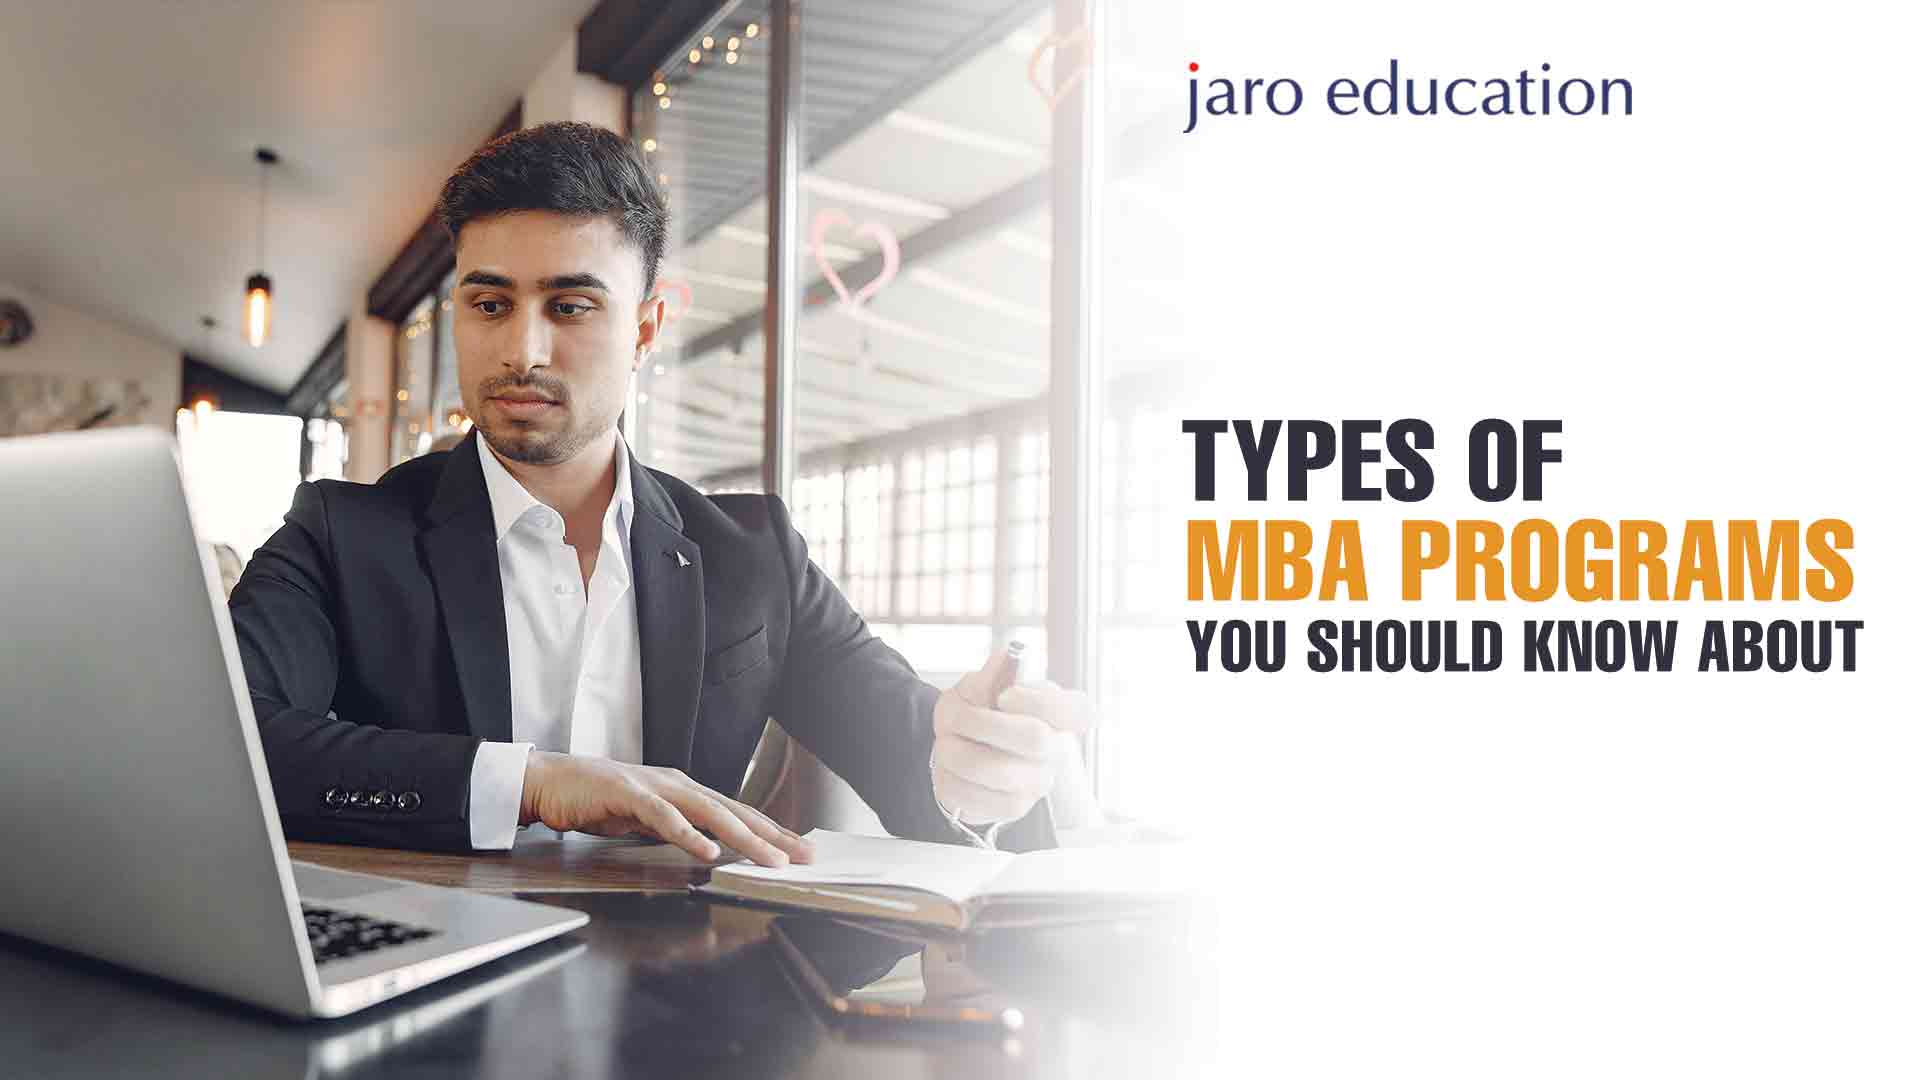 Types of MBA Programs You Should Know About